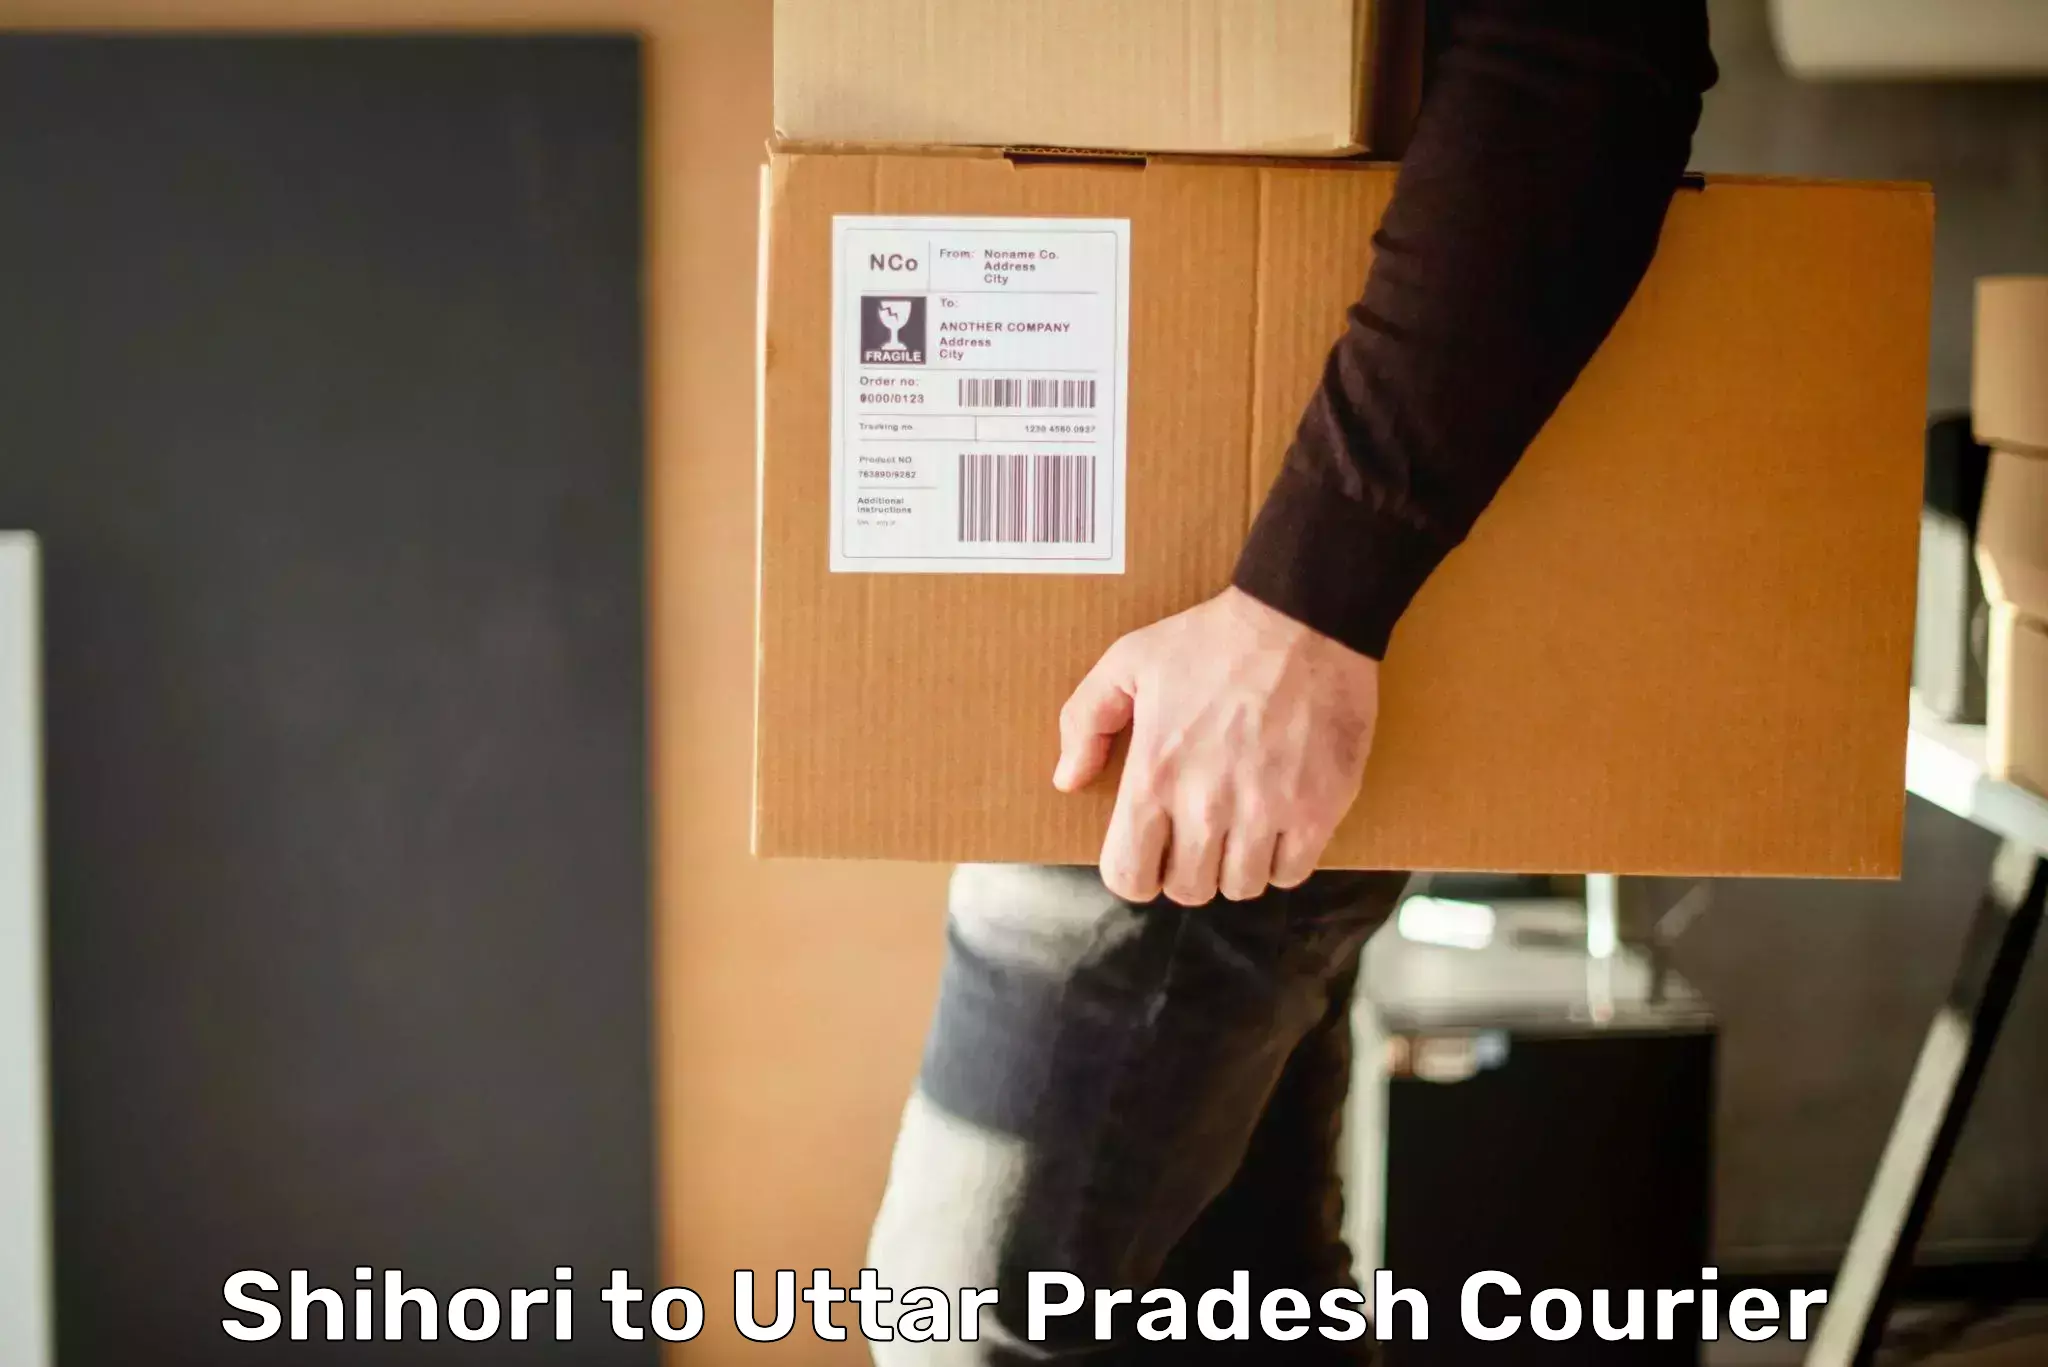 Personalized courier experiences in Shihori to Uttar Pradesh